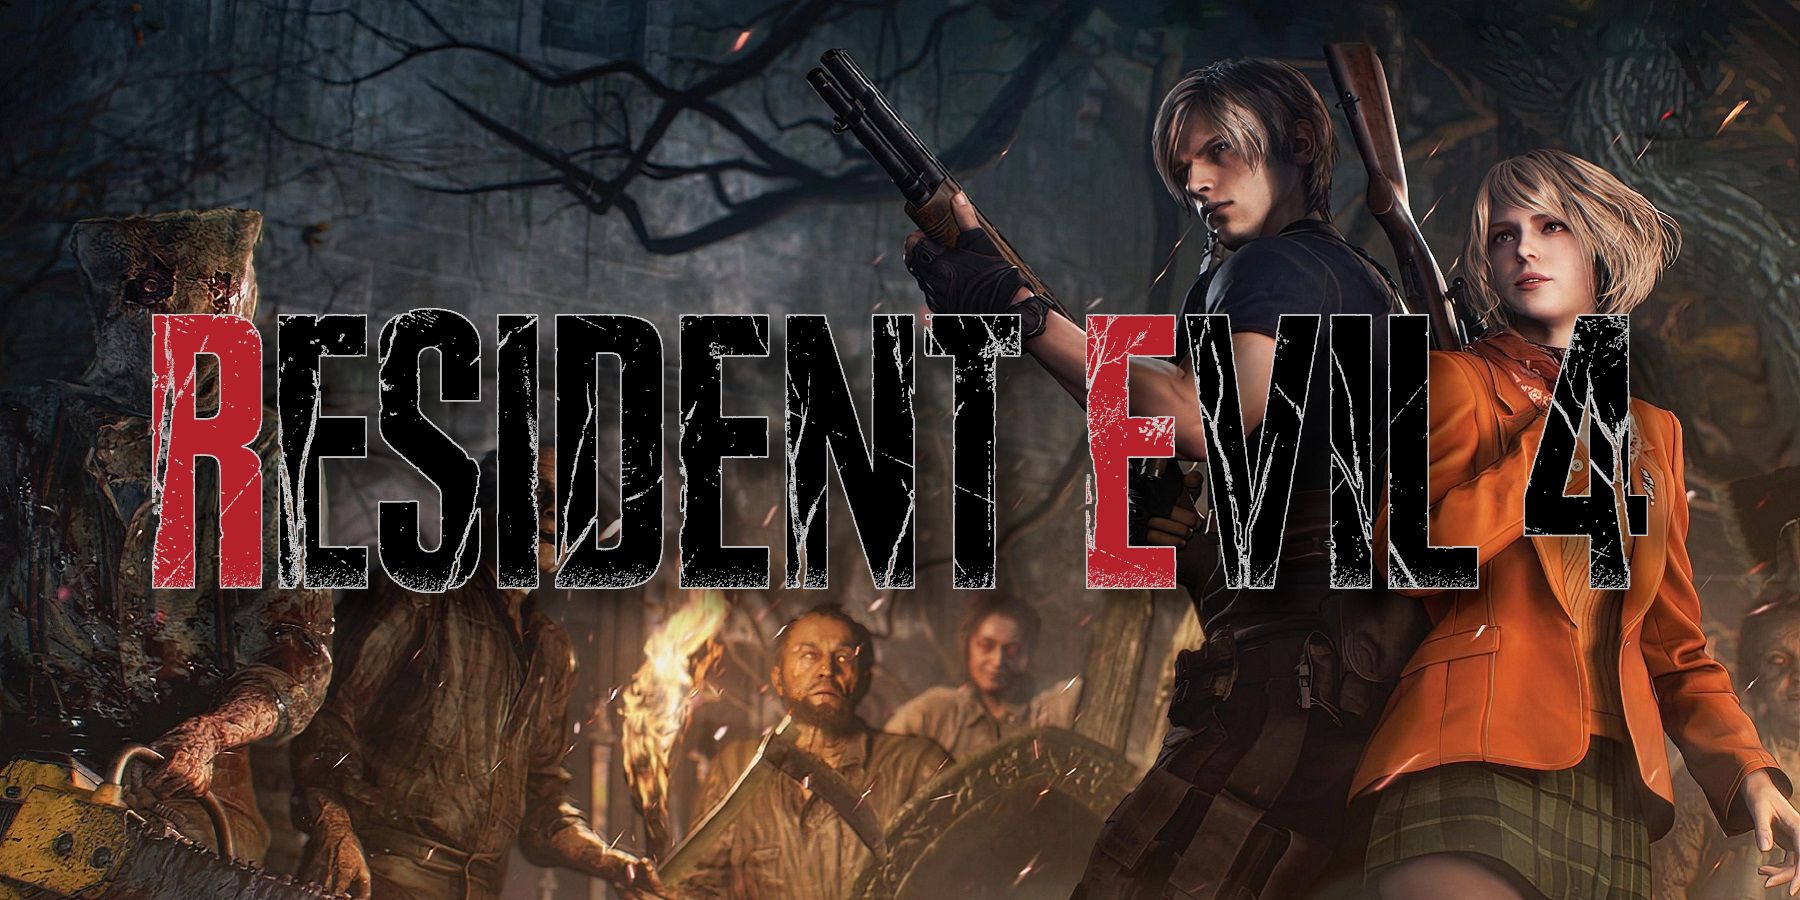 Resident Evil 4 remake logo with Leon Kennedy and Ashley Graham in the background.